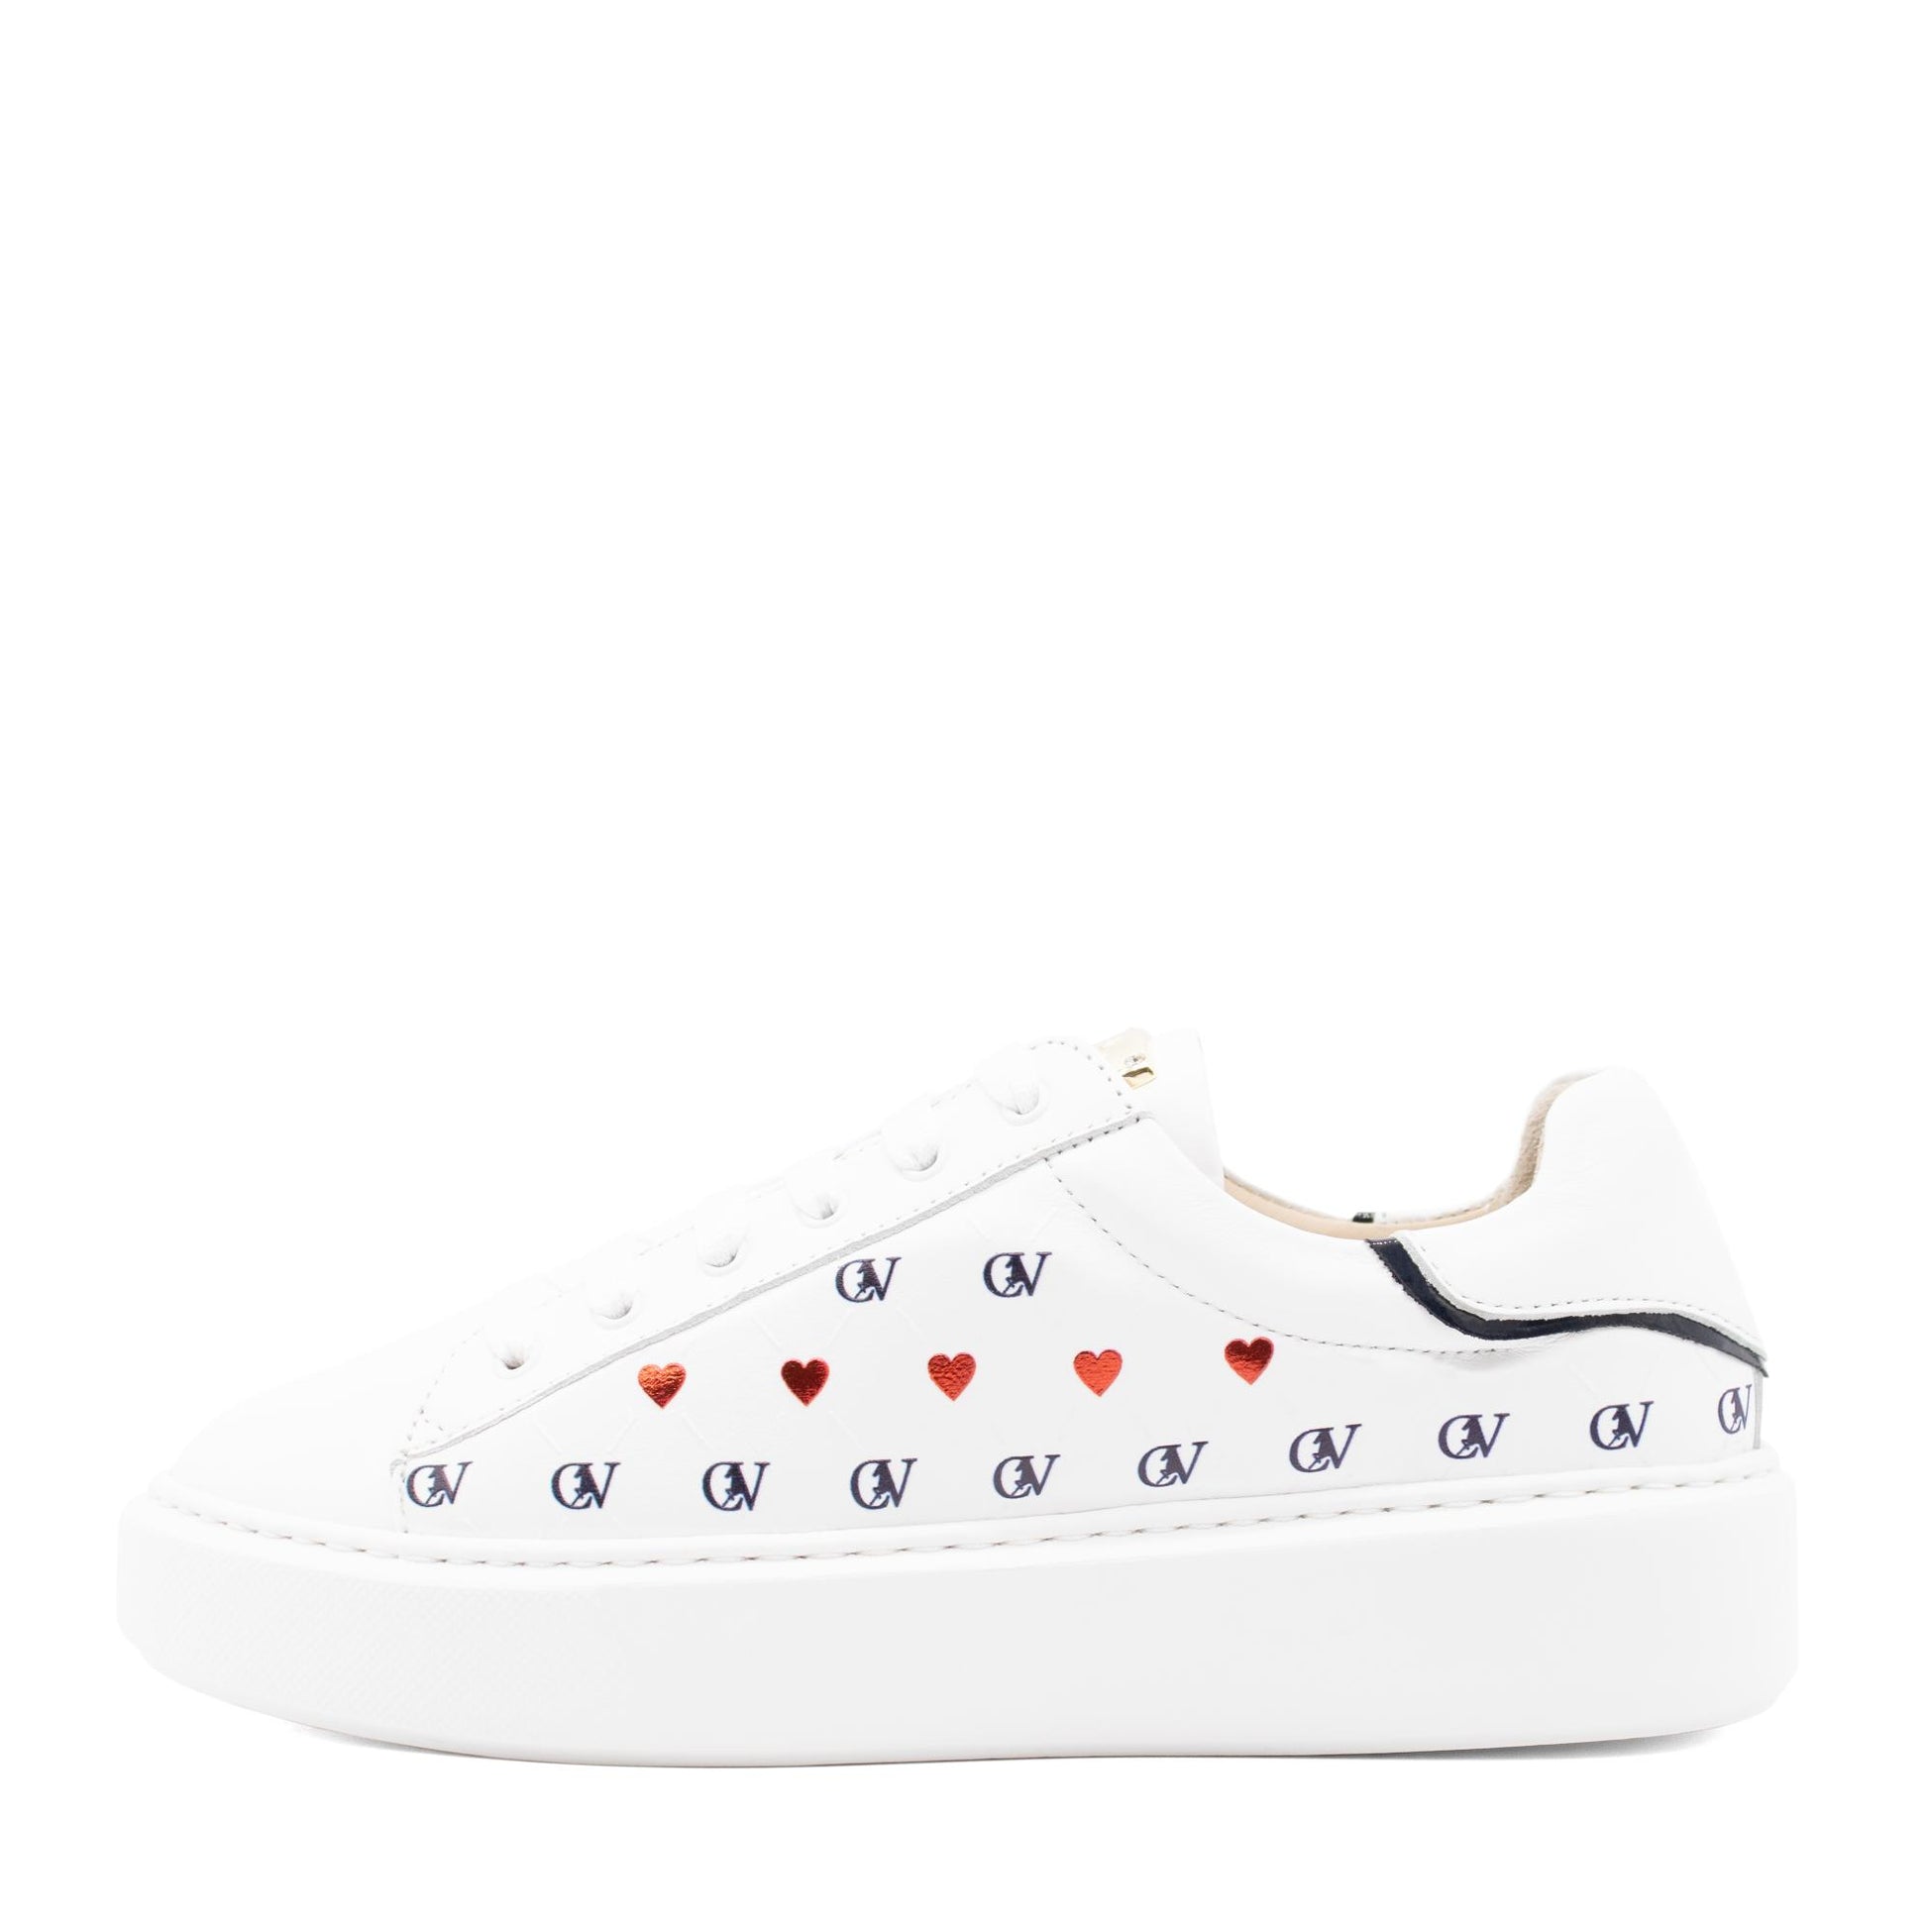 Cavalinho Love Yourself Sneakers - Navy / White / Red - 48010108.22_4